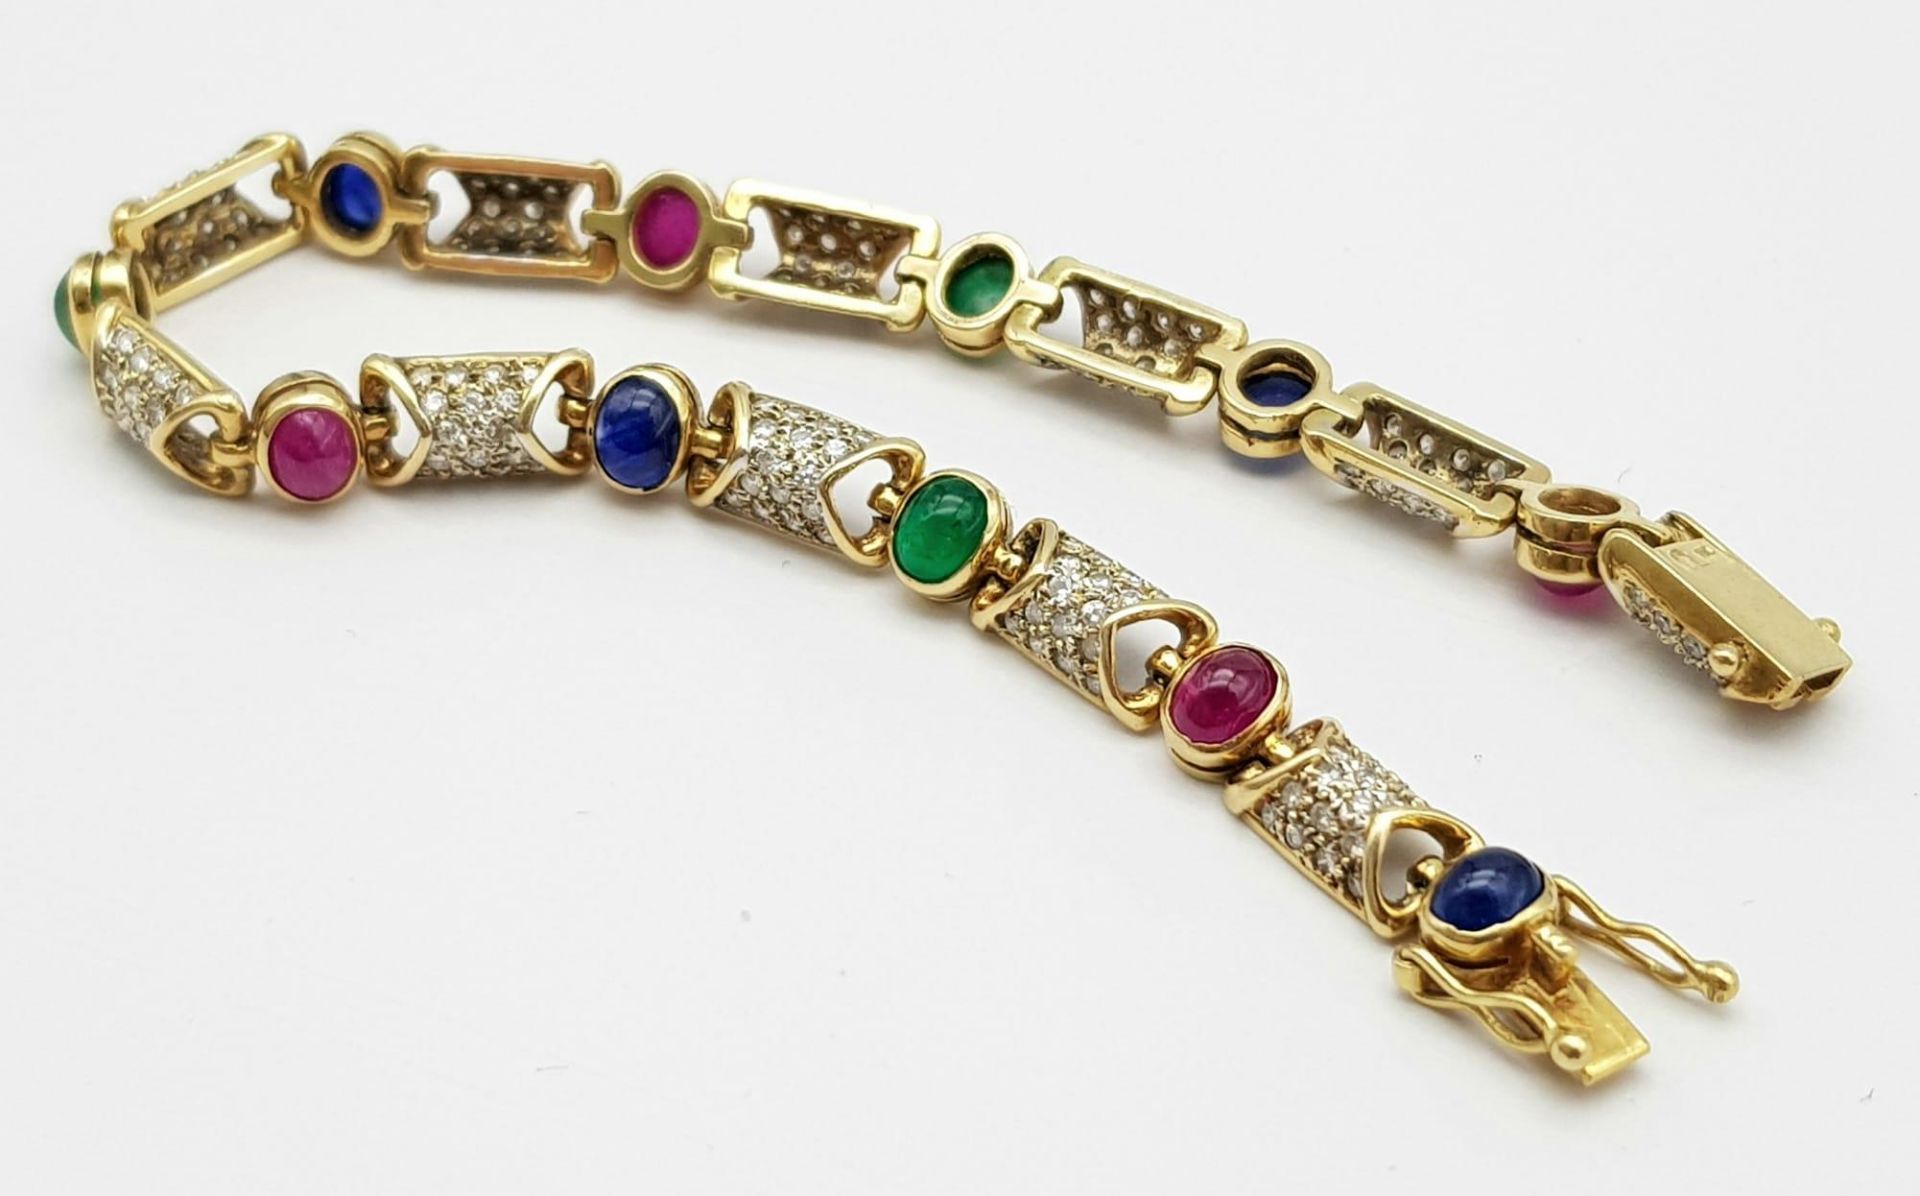 A GORGEOUS 18K YELLOW GOLD DIAMOND, SAPPHIRE, RUBY & EMERALD SET BRACELET. 1.50CTW OF ENCRUSTED - Image 4 of 6